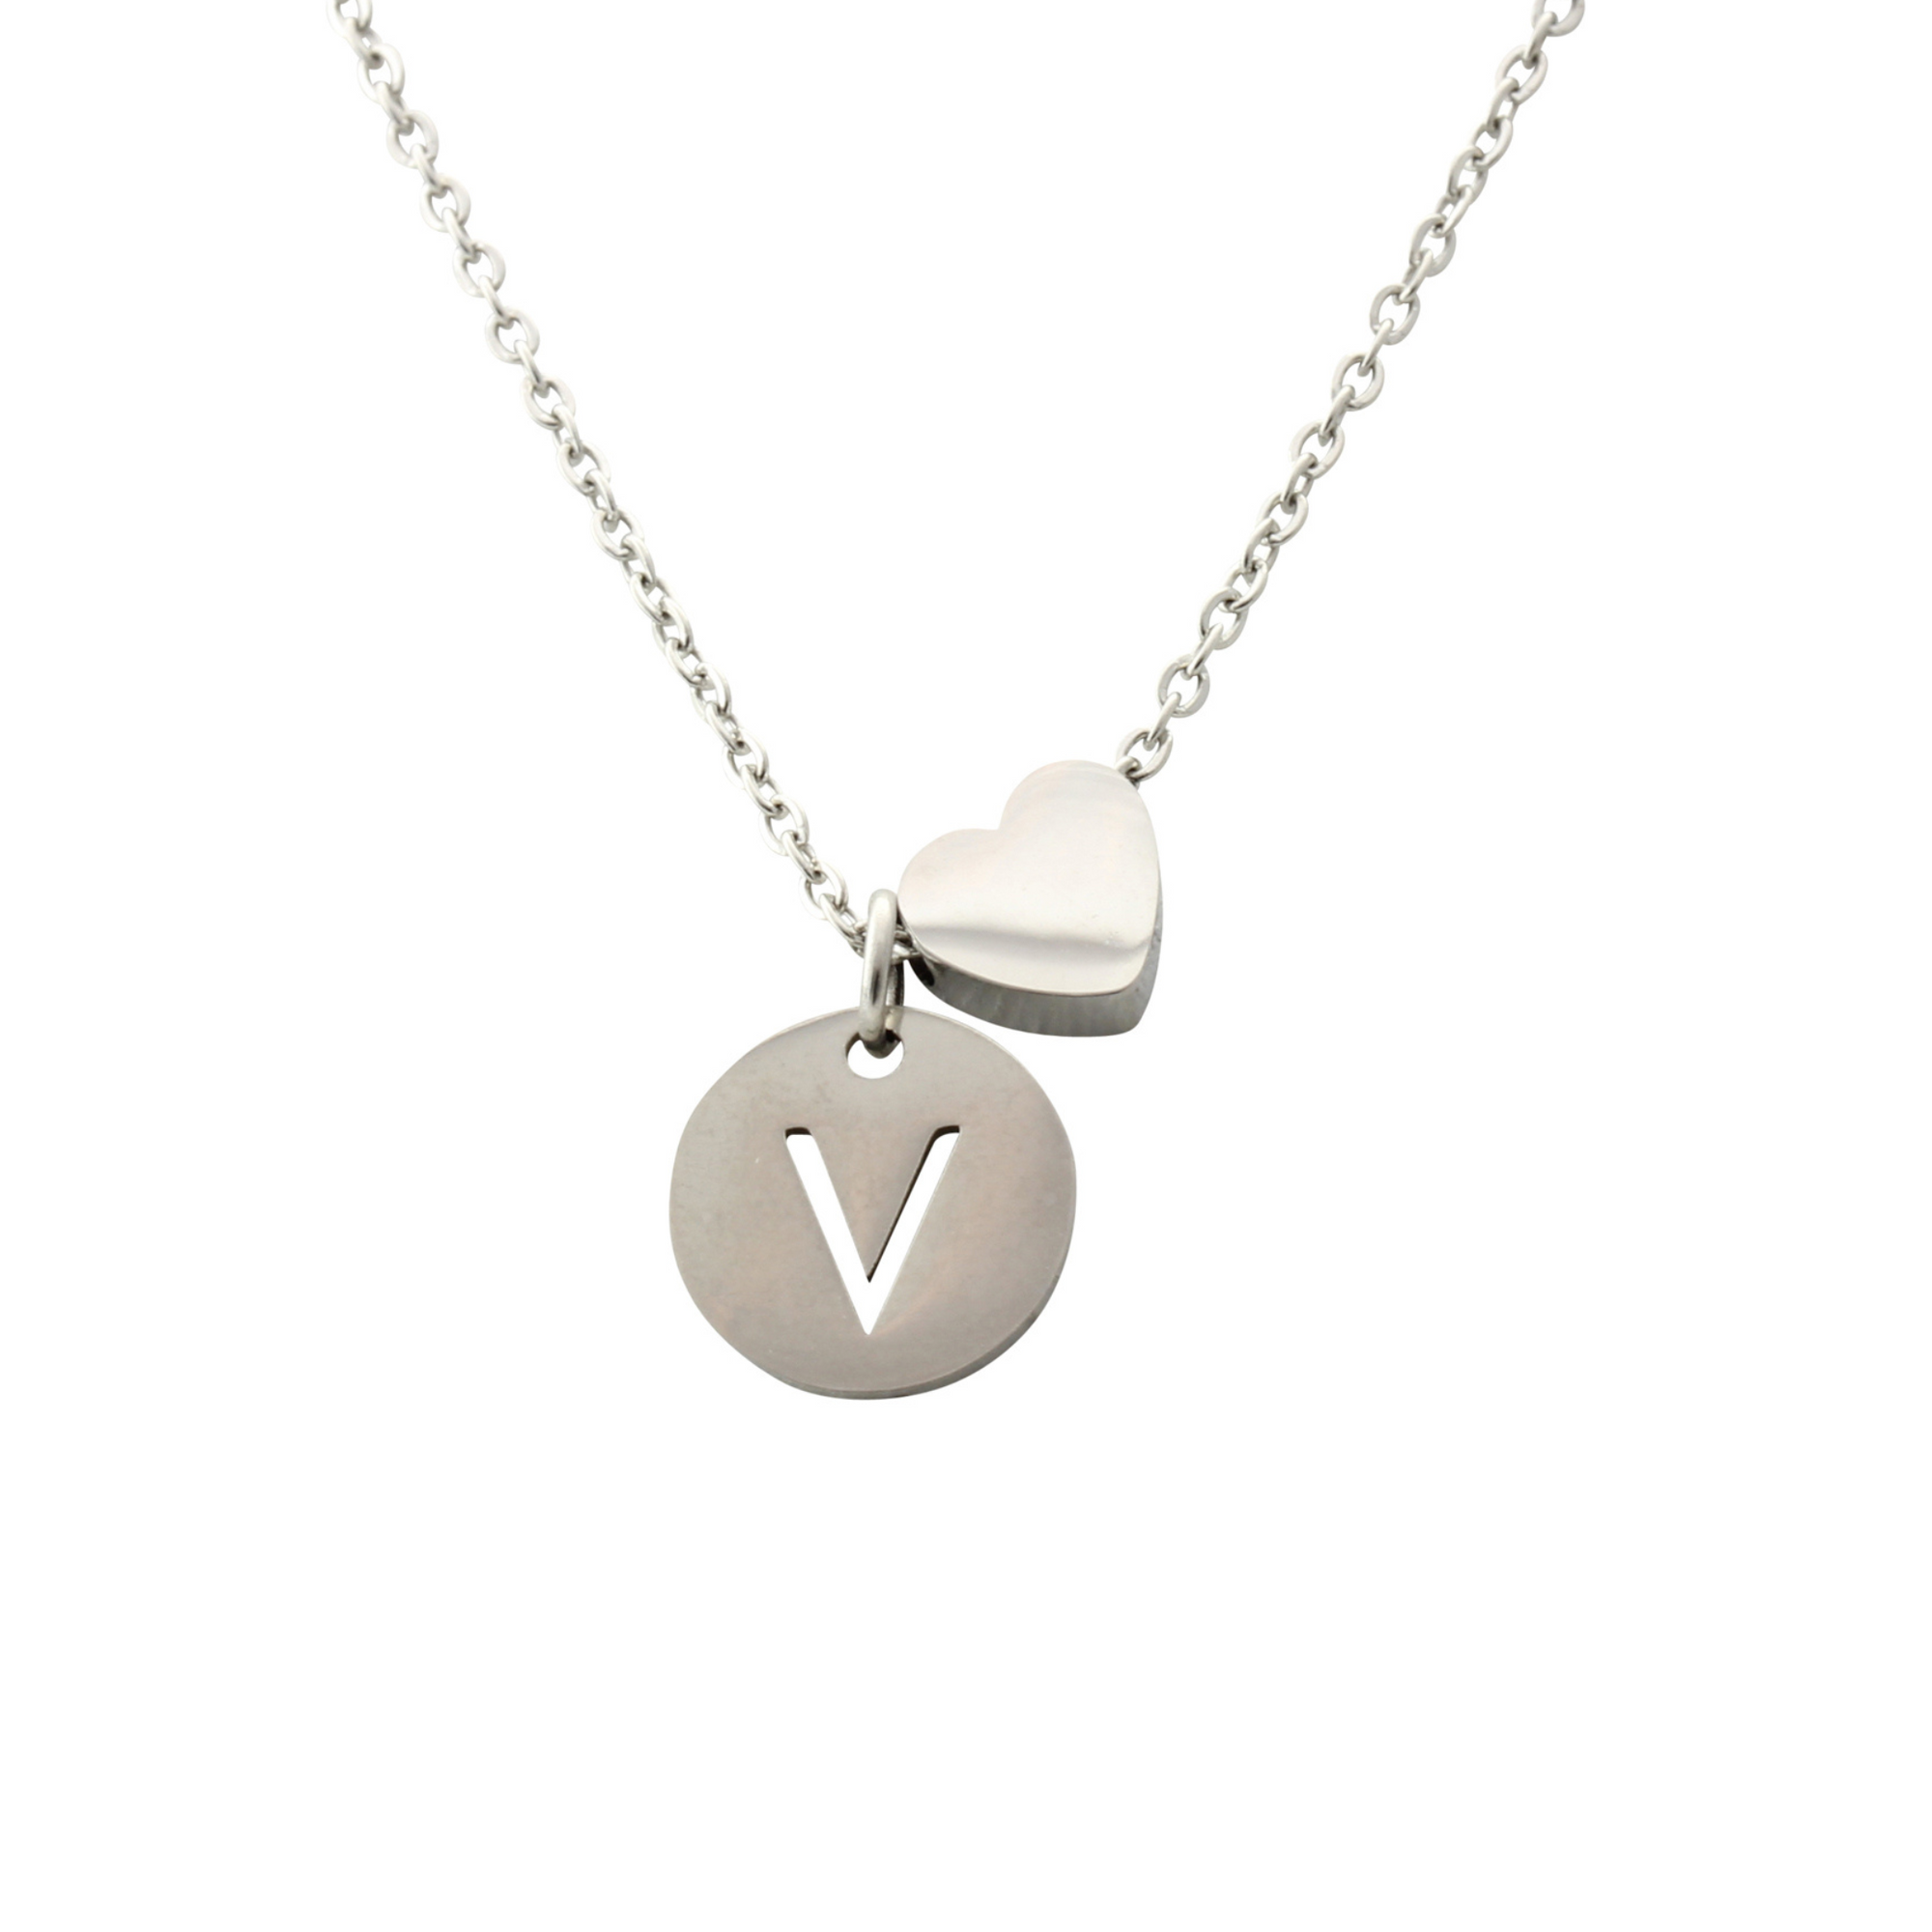 "Imperméable” Waterproof Personalized Initial Necklace with Heart - Silver/Silver